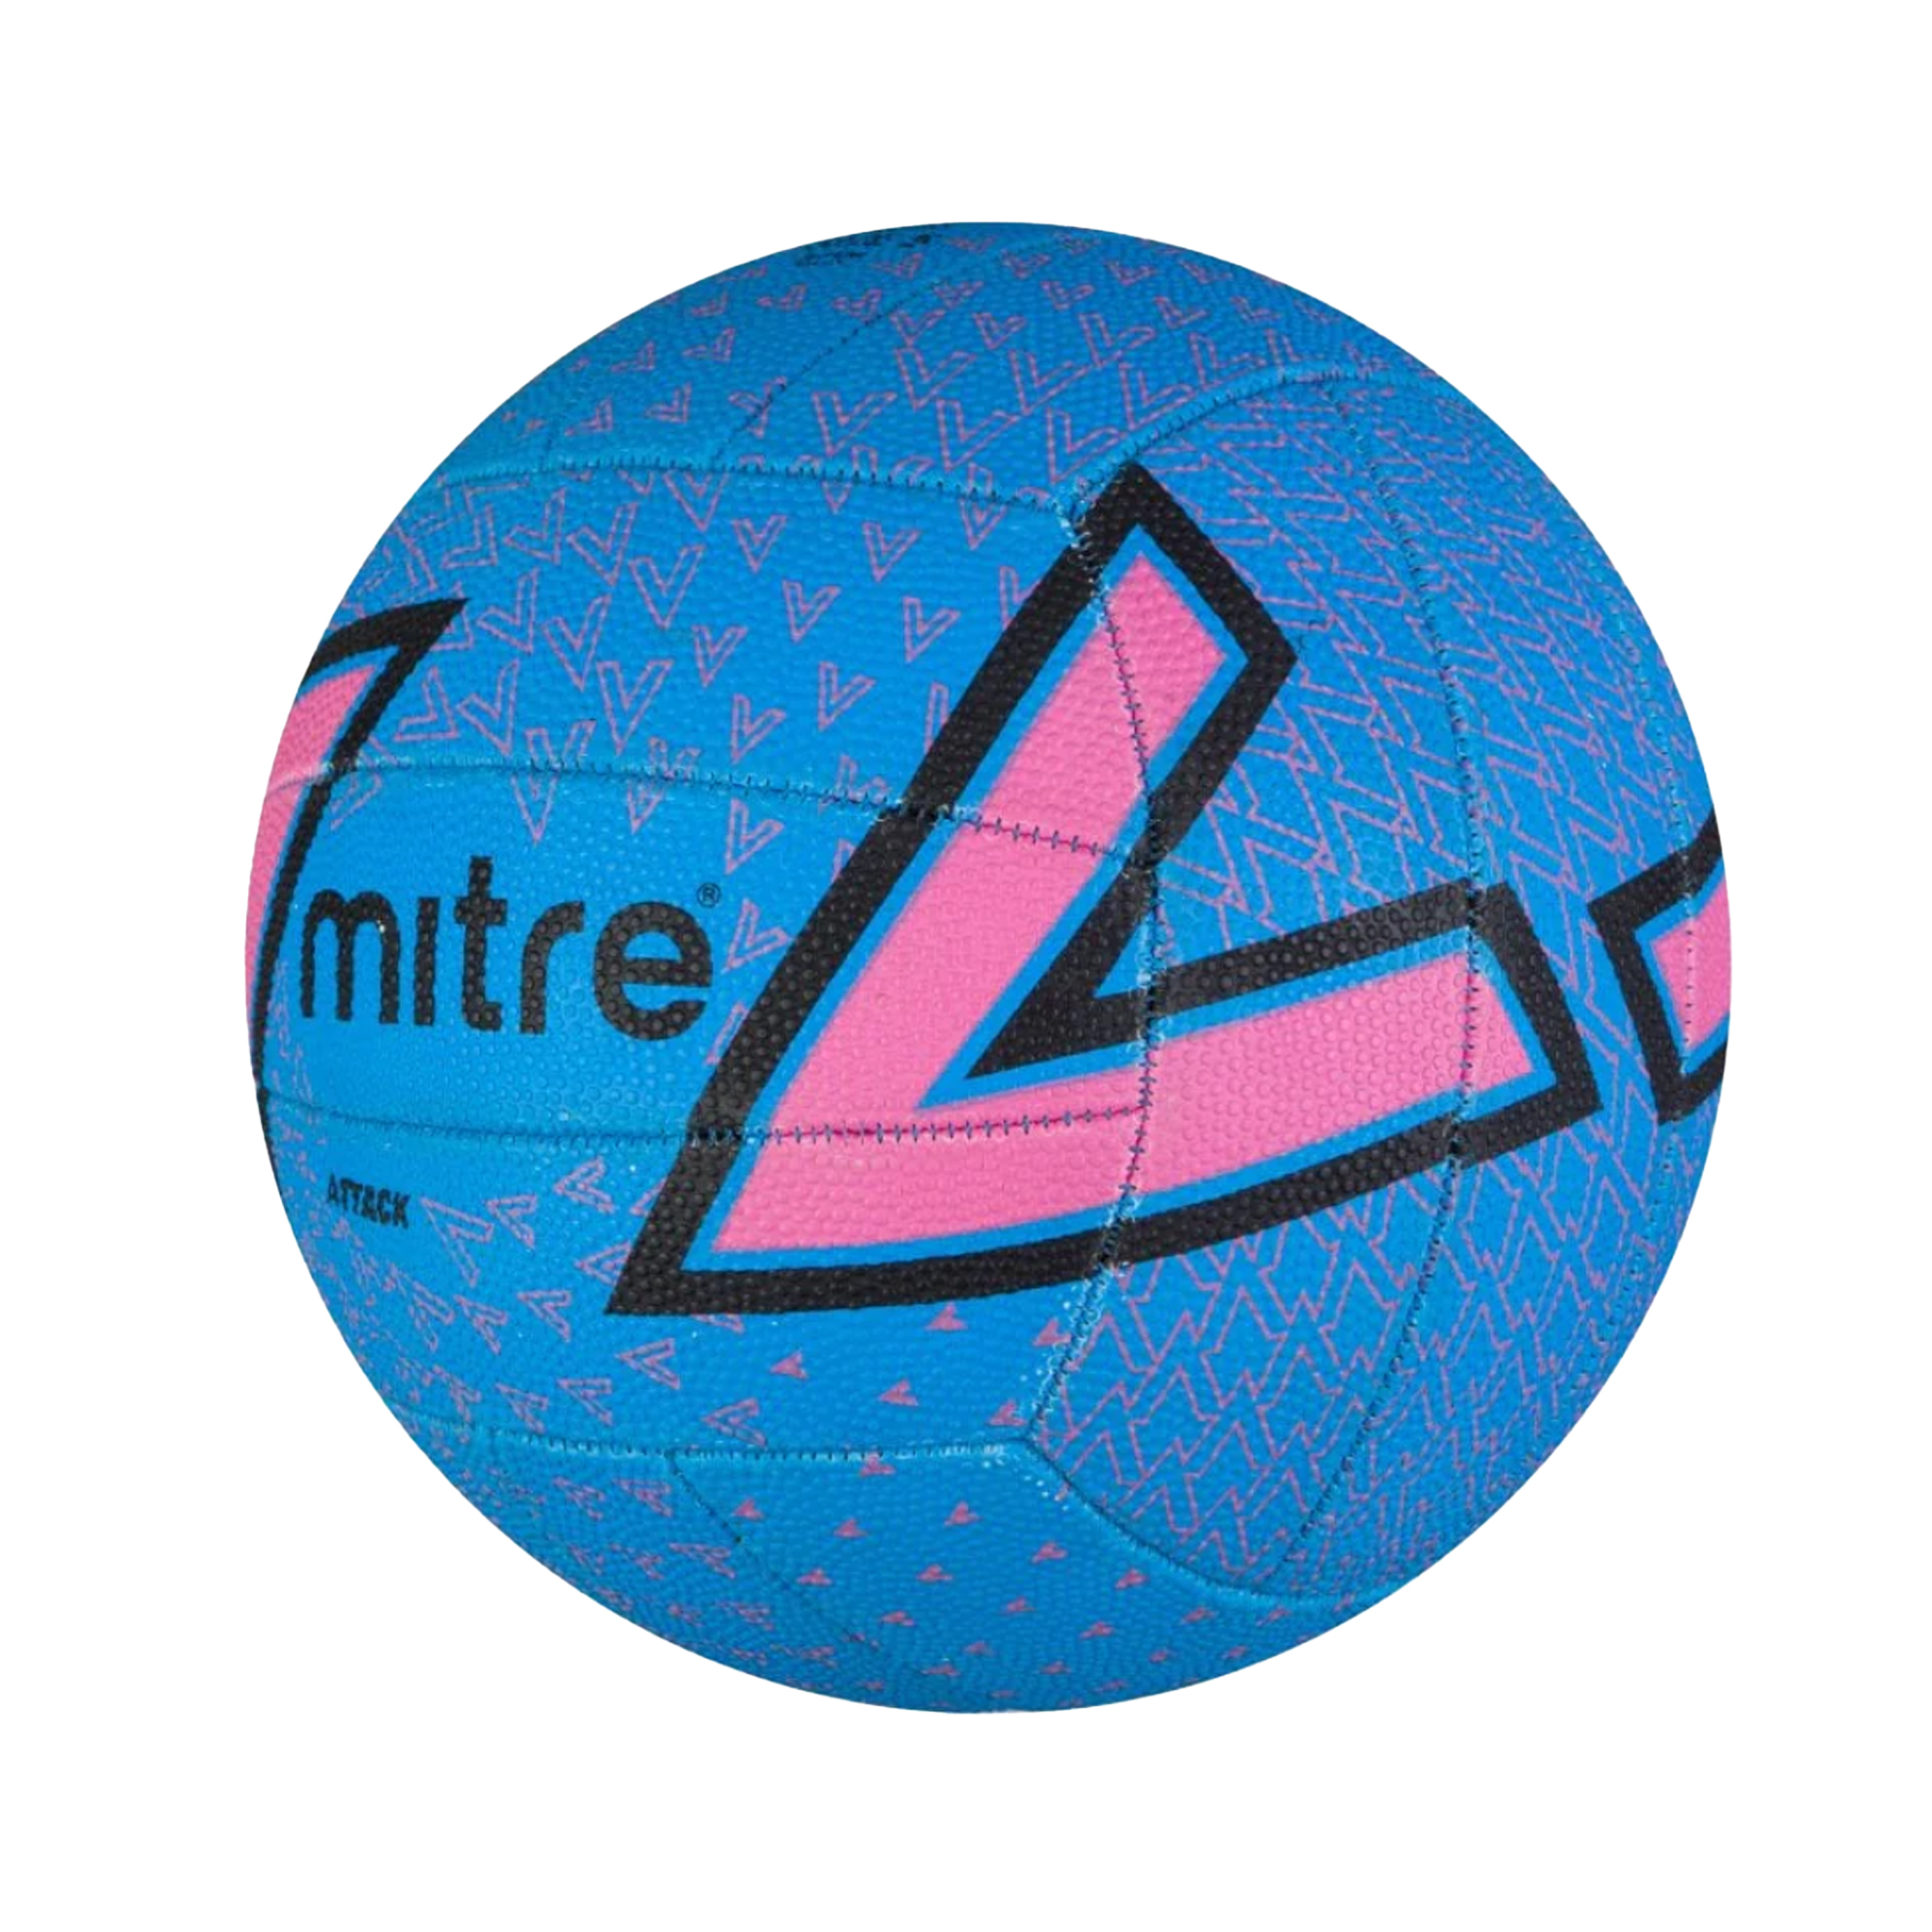 Ataque 18 Painel Netball Mitre Attack | Sport Zone MKP